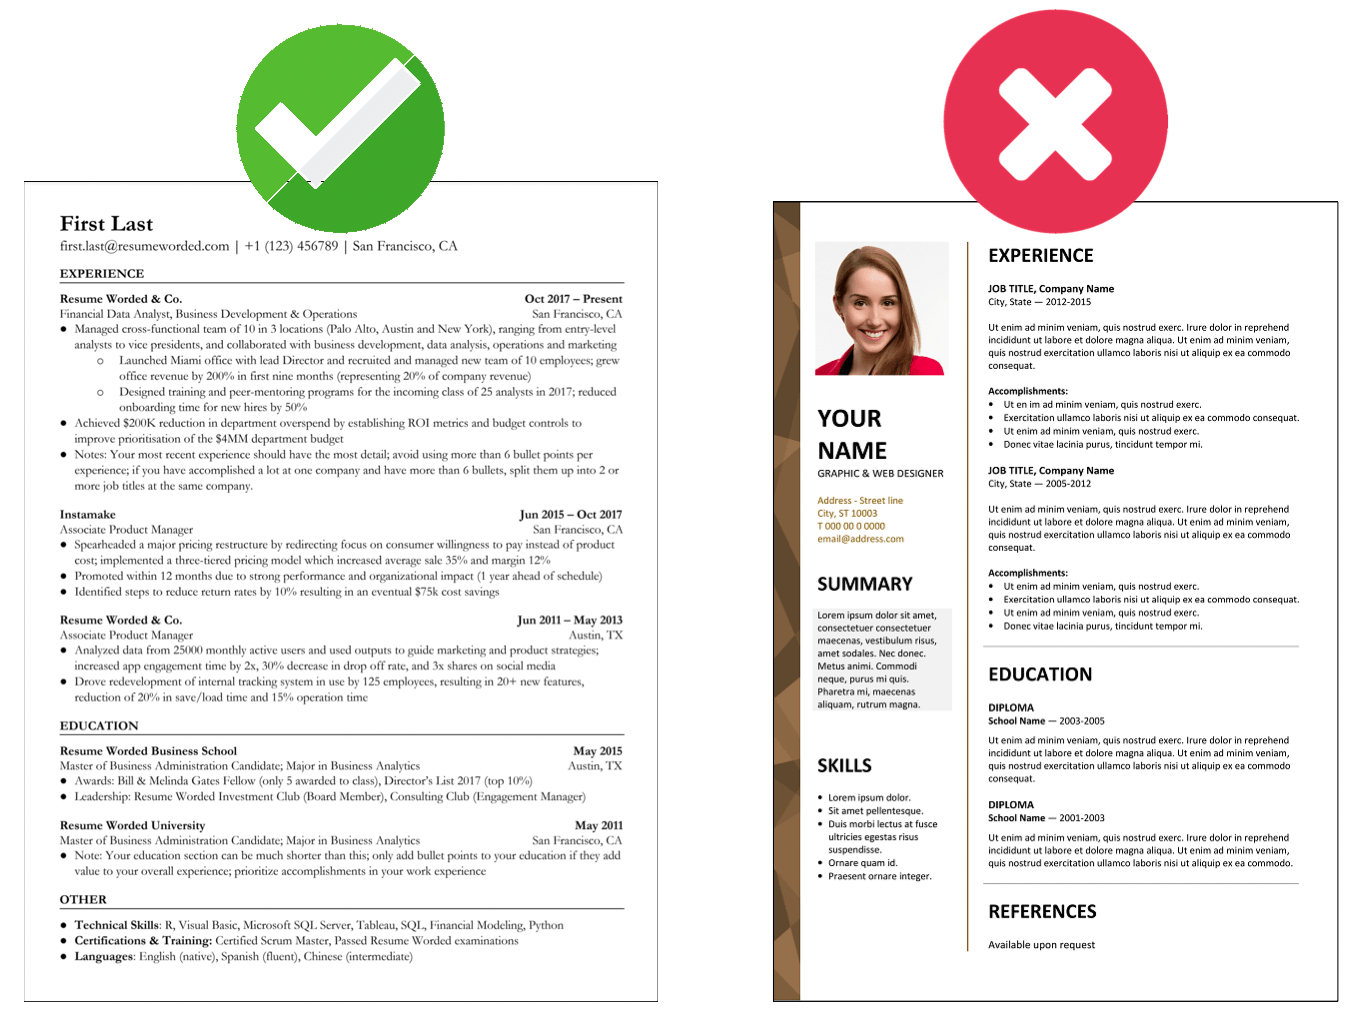 Makes great use of space - Professional Resume